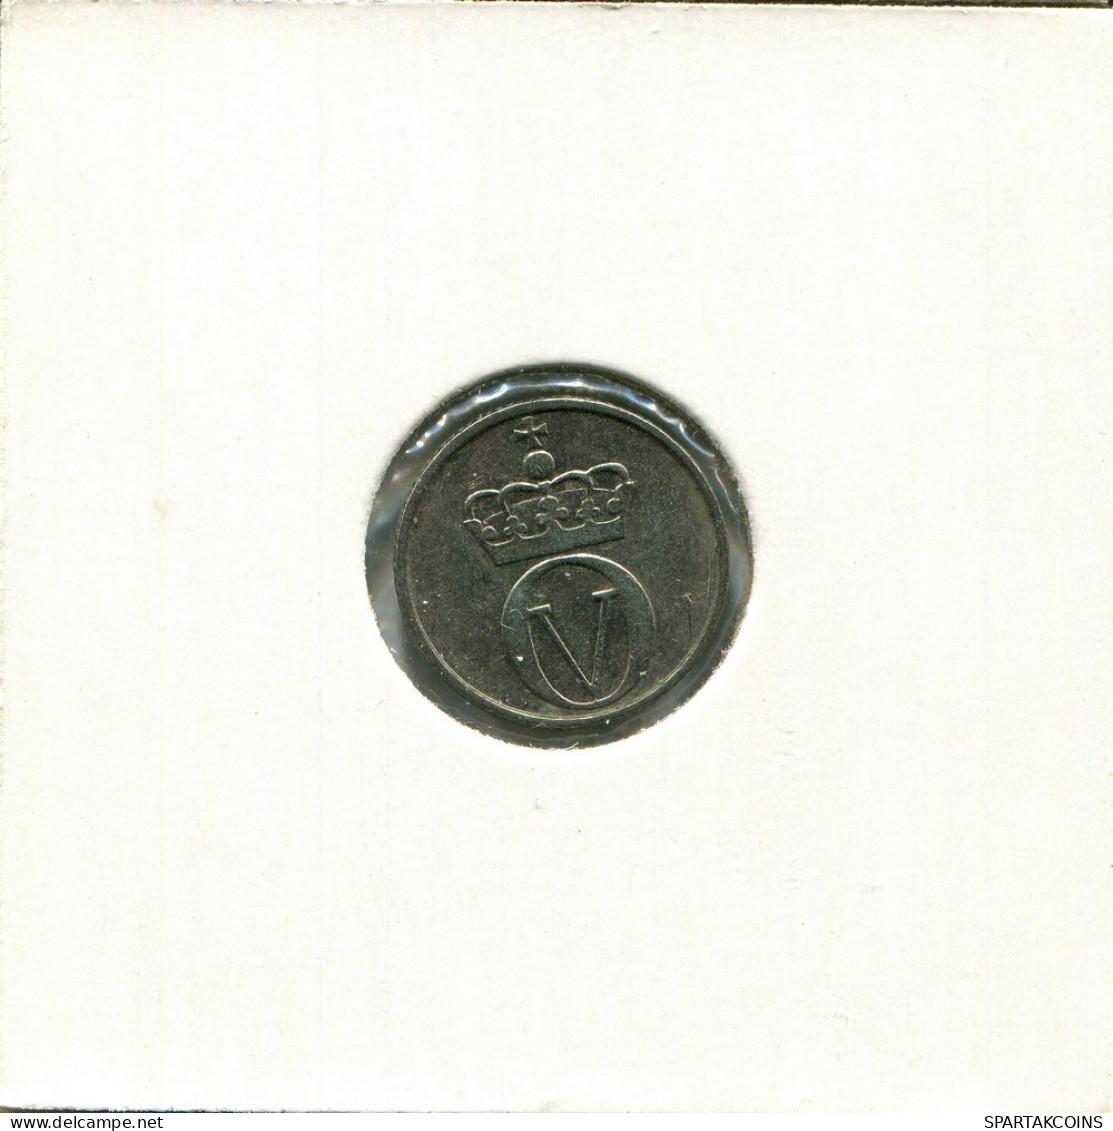 10 ORE 1971 NORWAY Coin #AU974.U.A - Norway